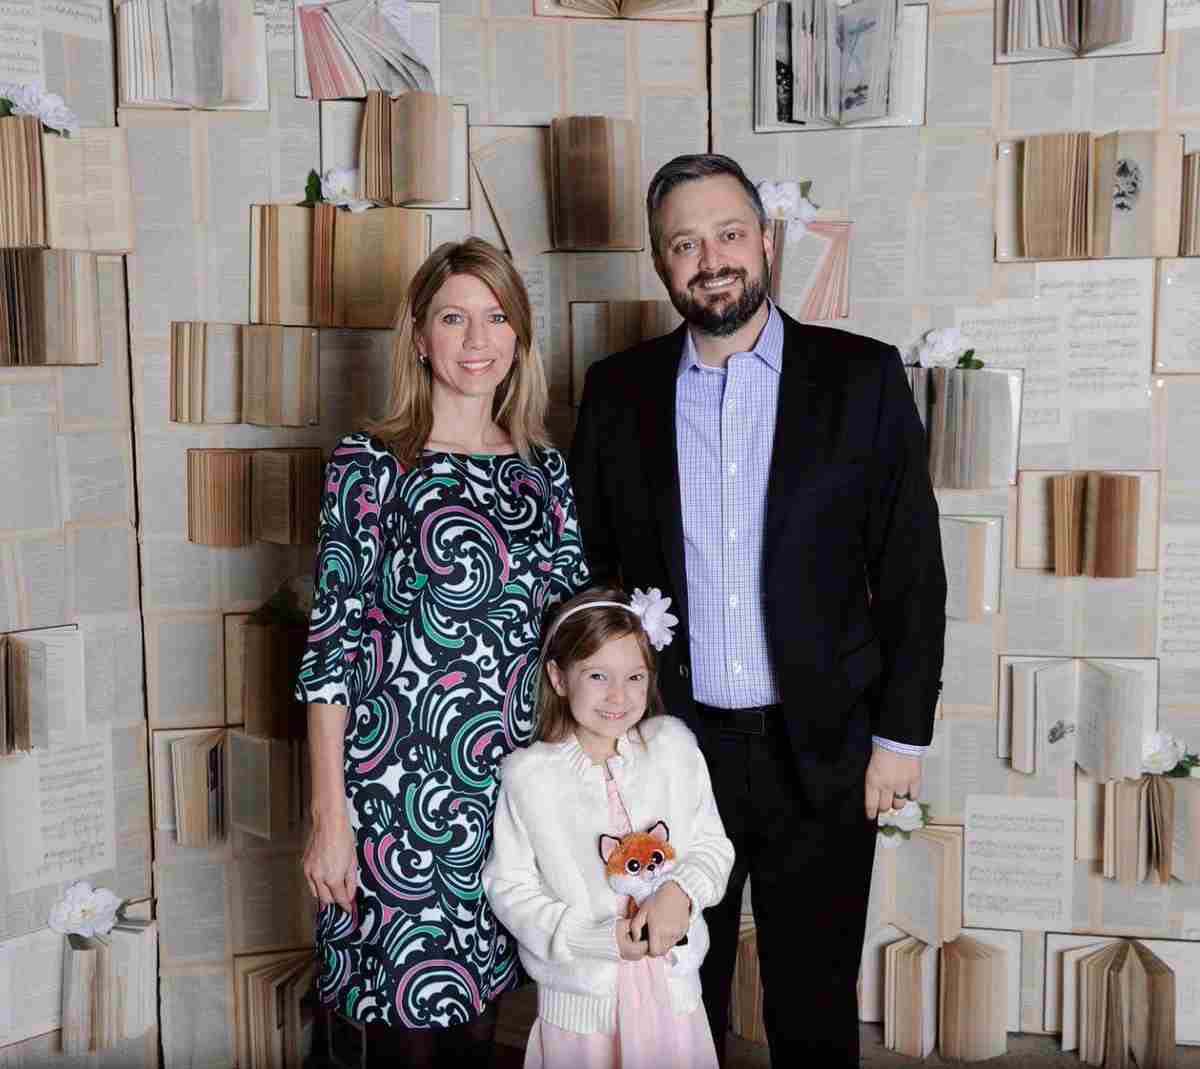 Image of Nate Bargatze and his family